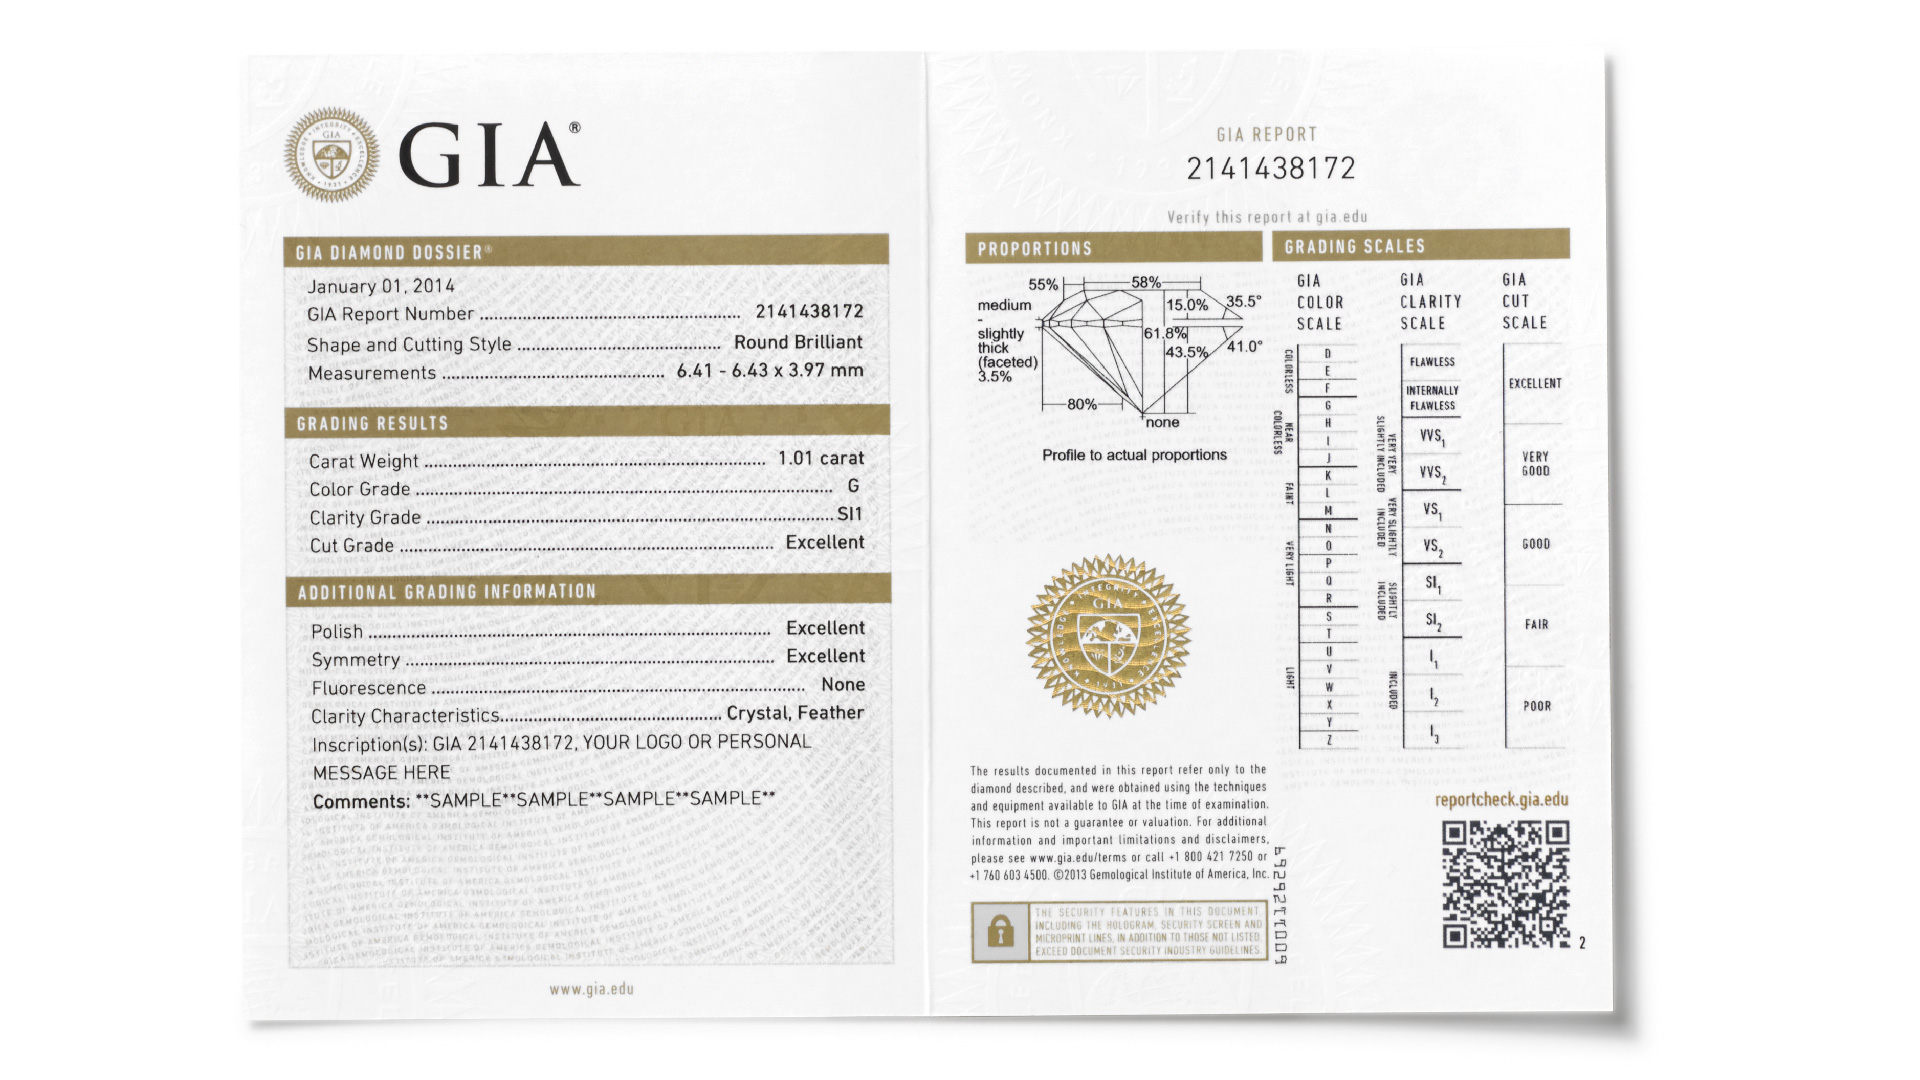 The GIA Diamond Dossier® includes an assessment of the 4Cs – Color, Clarity, Cut and Carat Weight – plus a microscopic laser inscription of the GIA report number for easy identification in a smaller format.